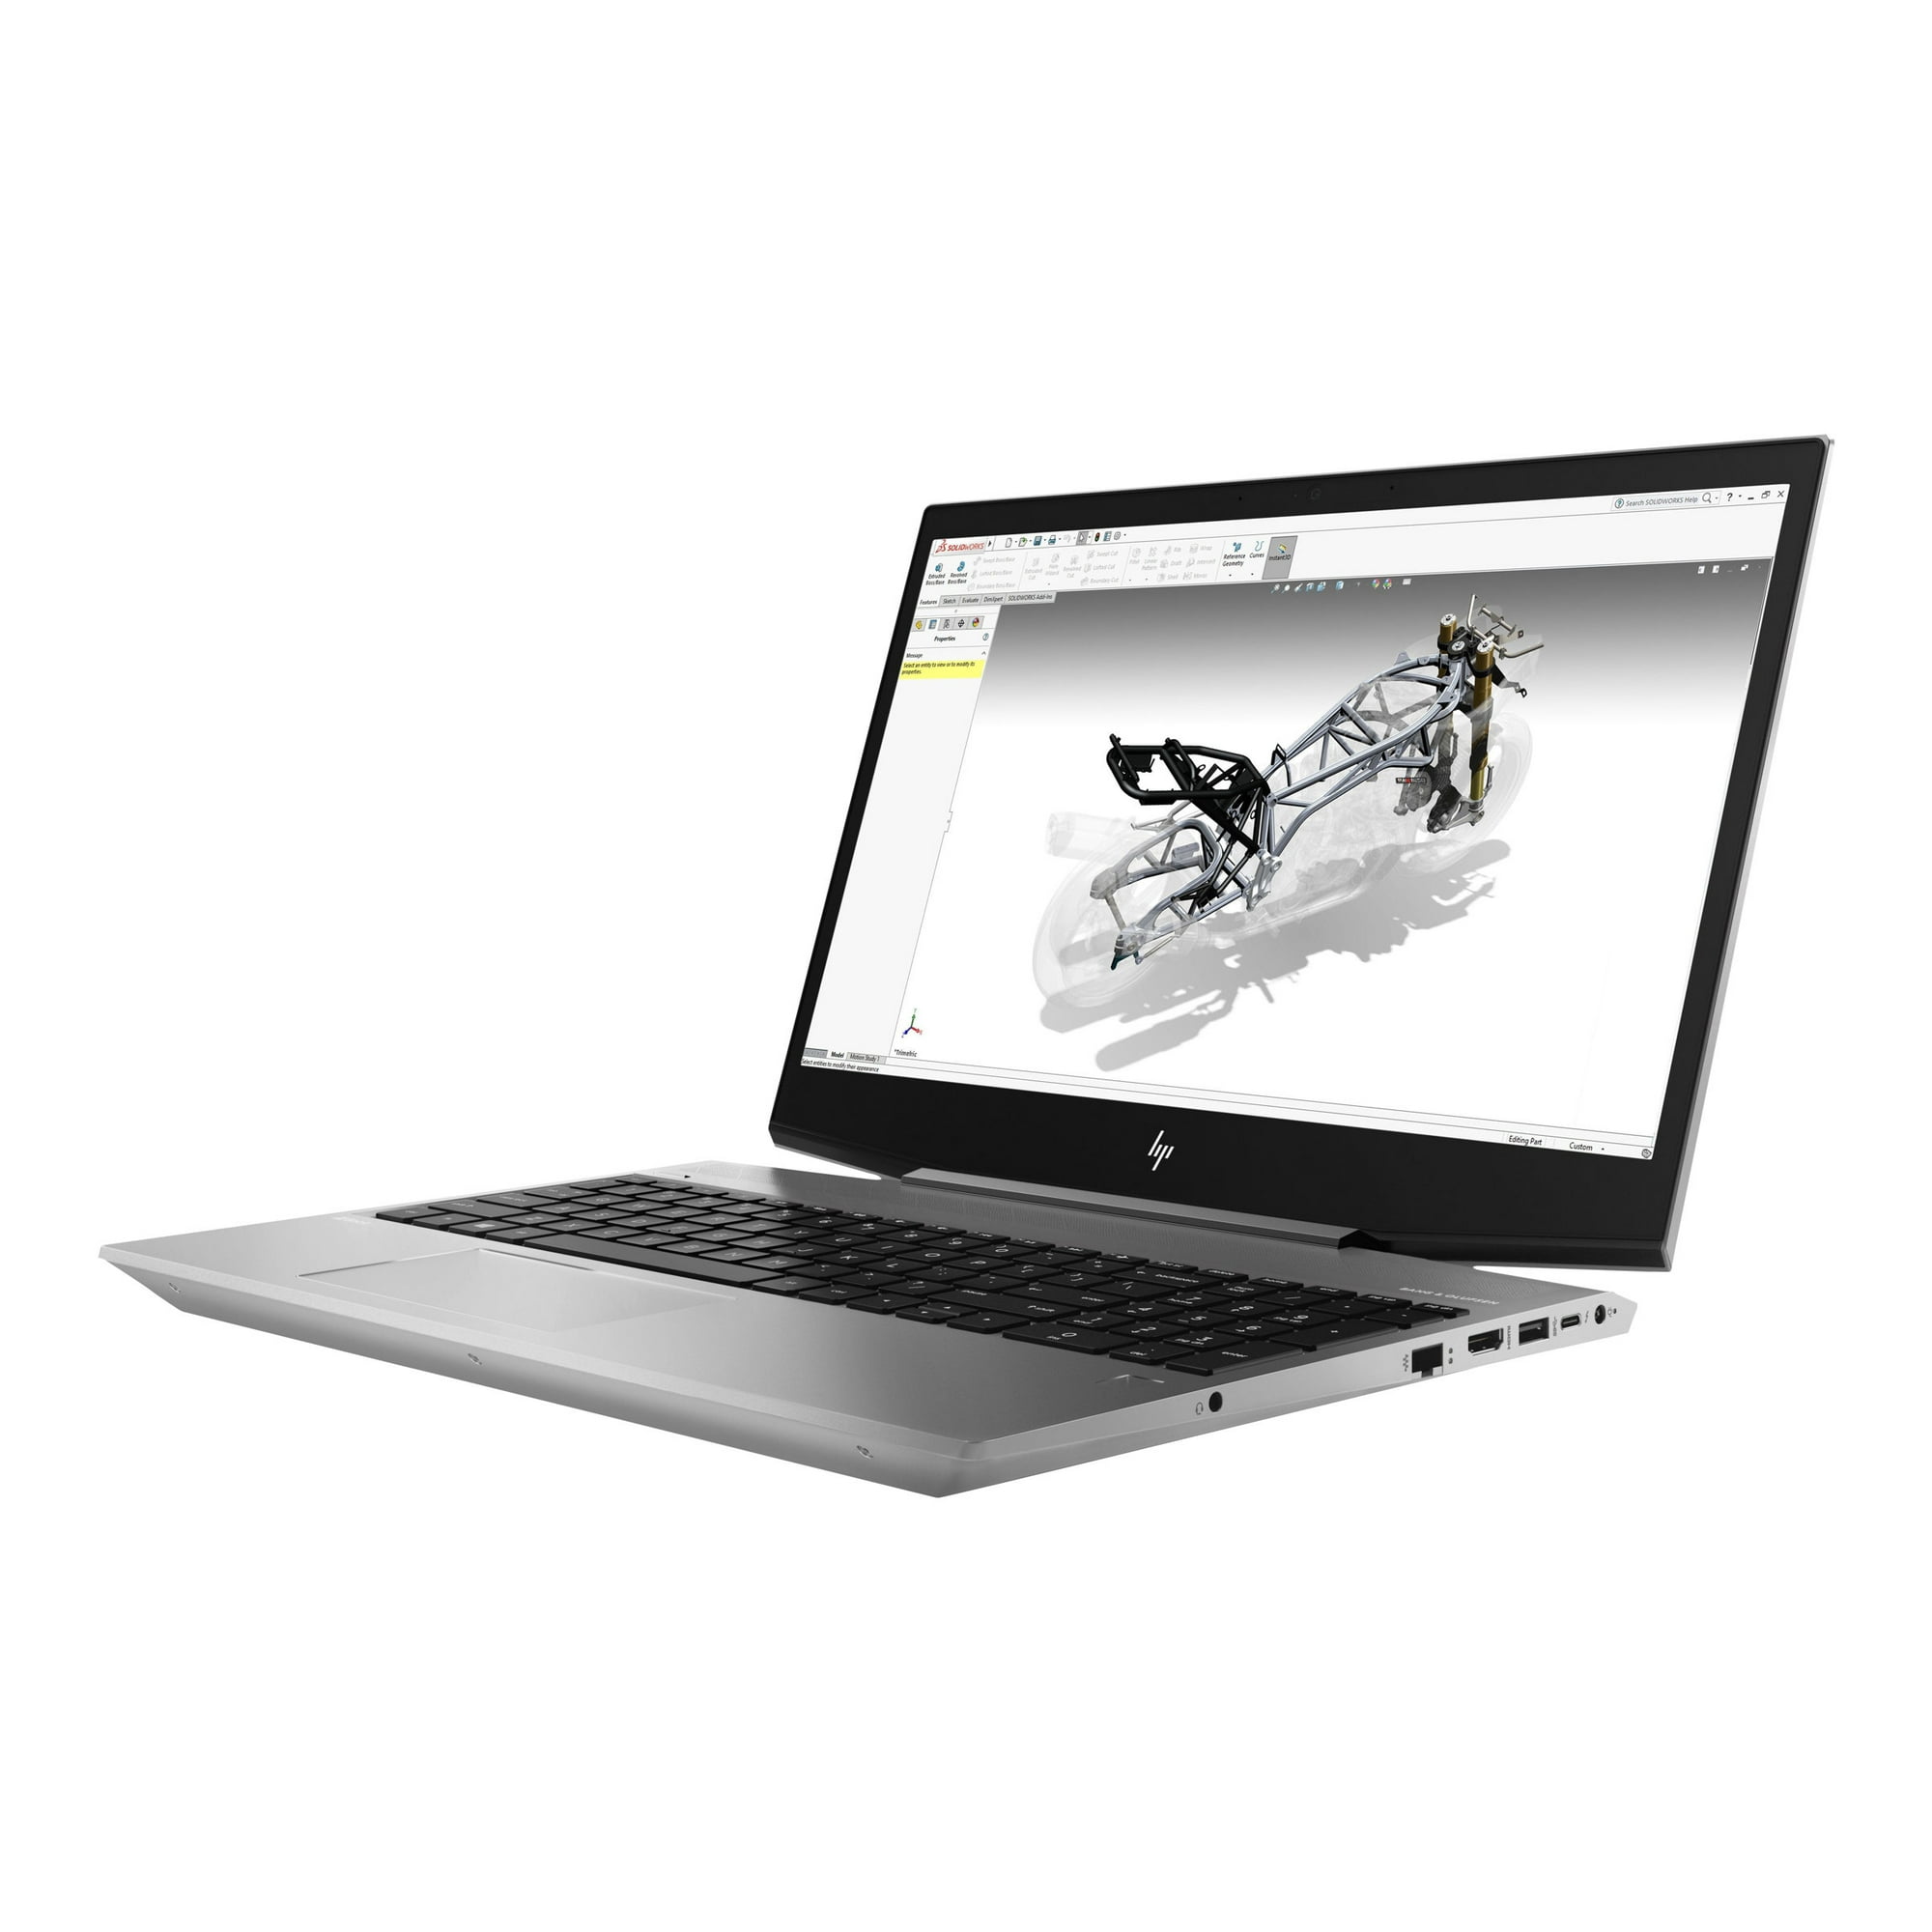 too much shutter To take care HP ZBook 15v G5 Mobile Workstation - Intel Core i7 8850H / 2.6 GHz - Win 10  Pro 64-bit - Quadro P600 - 16 GB RAM - 512 GB SSD NVMe, TLC -